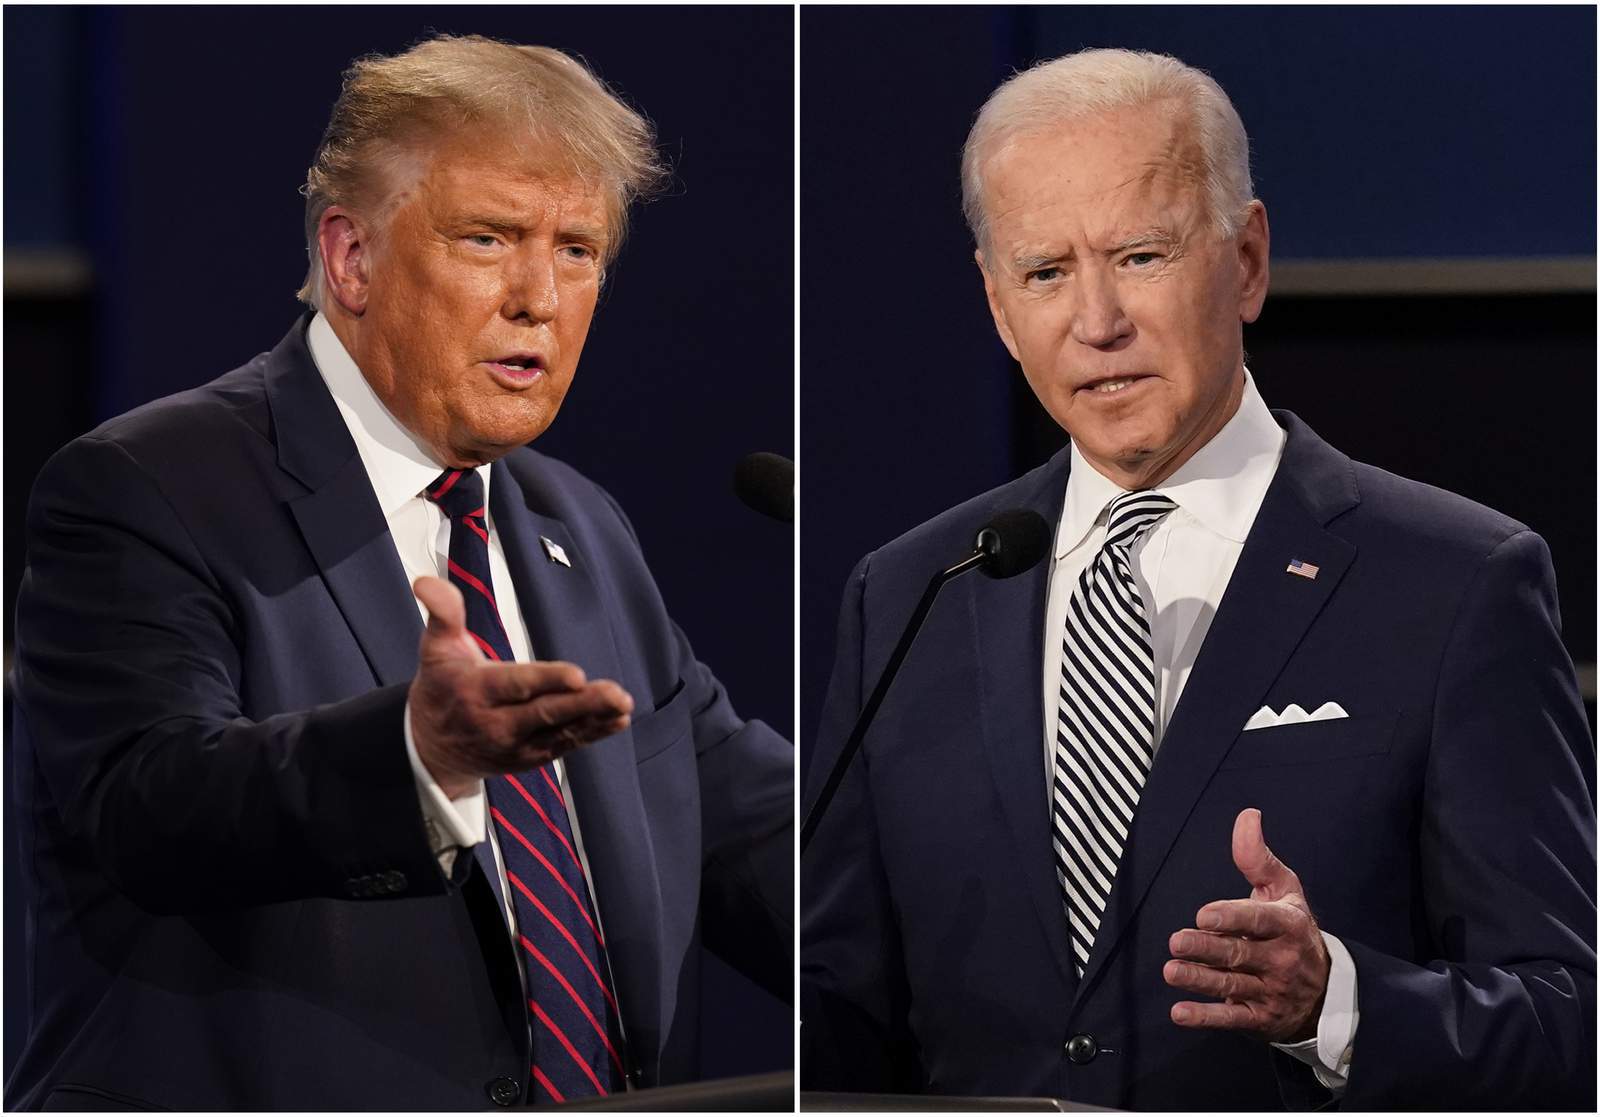 Live updates: 2020 election results, Electoral College tracking for Trump, Biden